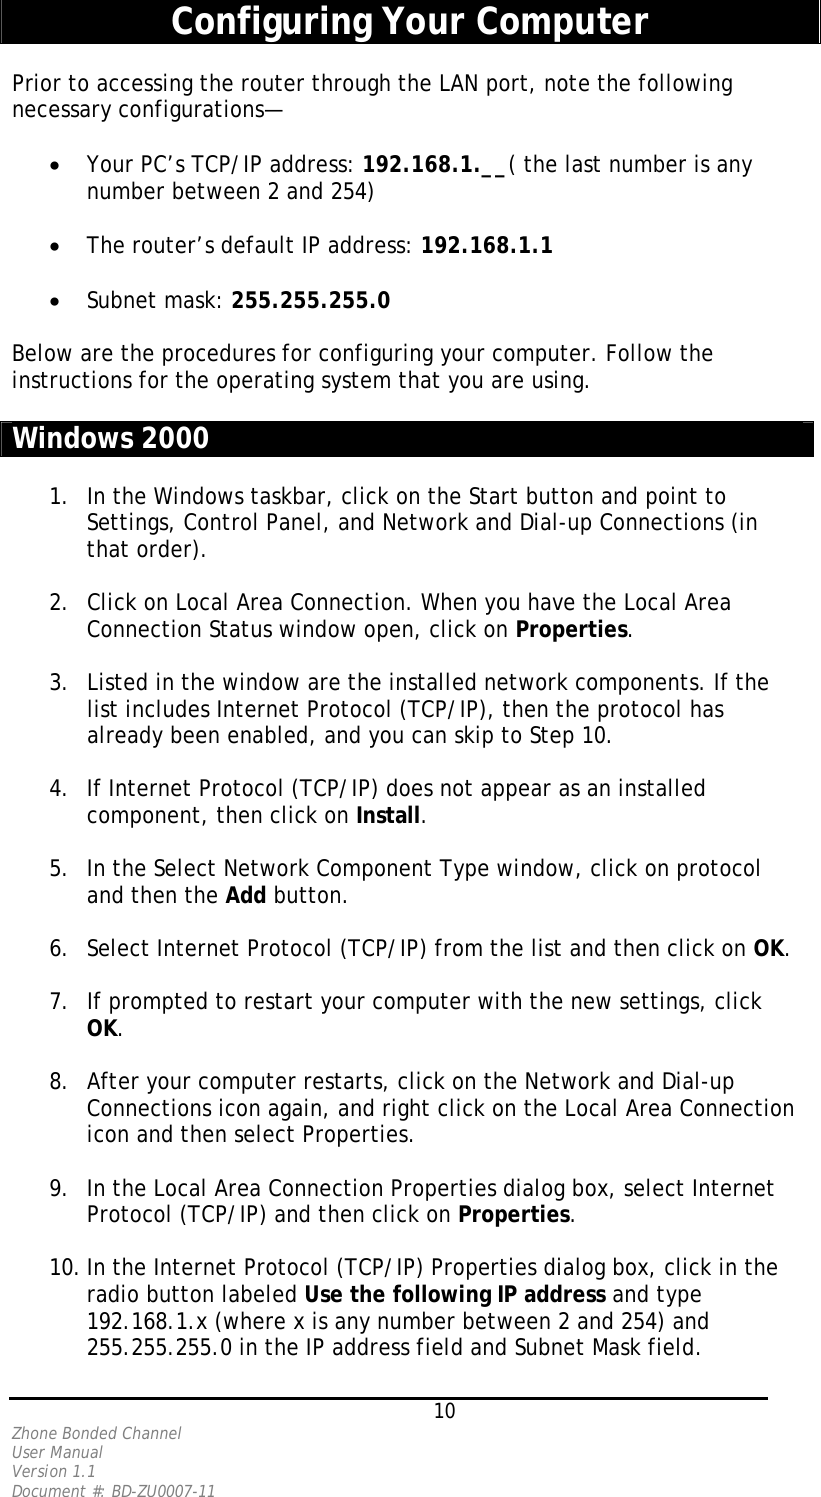   10 Zhone Bonded Channel User Manual  Version 1.1 Document #: BD-ZU0007-11  Configuring Your Computer  Prior to accessing the router through the LAN port, note the following necessary configurations—  •  Your PC’s TCP/IP address: 192.168.1.__( the last number is any number between 2 and 254)  •  The router’s default IP address: 192.168.1.1  •  Subnet mask: 255.255.255.0  Below are the procedures for configuring your computer. Follow the instructions for the operating system that you are using.  Windows 2000  1.  In the Windows taskbar, click on the Start button and point to Settings, Control Panel, and Network and Dial-up Connections (in that order).  2.  Click on Local Area Connection. When you have the Local Area Connection Status window open, click on Properties.  3.  Listed in the window are the installed network components. If the list includes Internet Protocol (TCP/IP), then the protocol has already been enabled, and you can skip to Step 10.  4.  If Internet Protocol (TCP/IP) does not appear as an installed component, then click on Install.  5.  In the Select Network Component Type window, click on protocol and then the Add button.  6.  Select Internet Protocol (TCP/IP) from the list and then click on OK.  7.  If prompted to restart your computer with the new settings, click OK.   8.  After your computer restarts, click on the Network and Dial-up Connections icon again, and right click on the Local Area Connection icon and then select Properties.  9.  In the Local Area Connection Properties dialog box, select Internet Protocol (TCP/IP) and then click on Properties.  10. In the Internet Protocol (TCP/IP) Properties dialog box, click in the radio button labeled Use the following IP address and type 192.168.1.x (where x is any number between 2 and 254) and 255.255.255.0 in the IP address field and Subnet Mask field. 